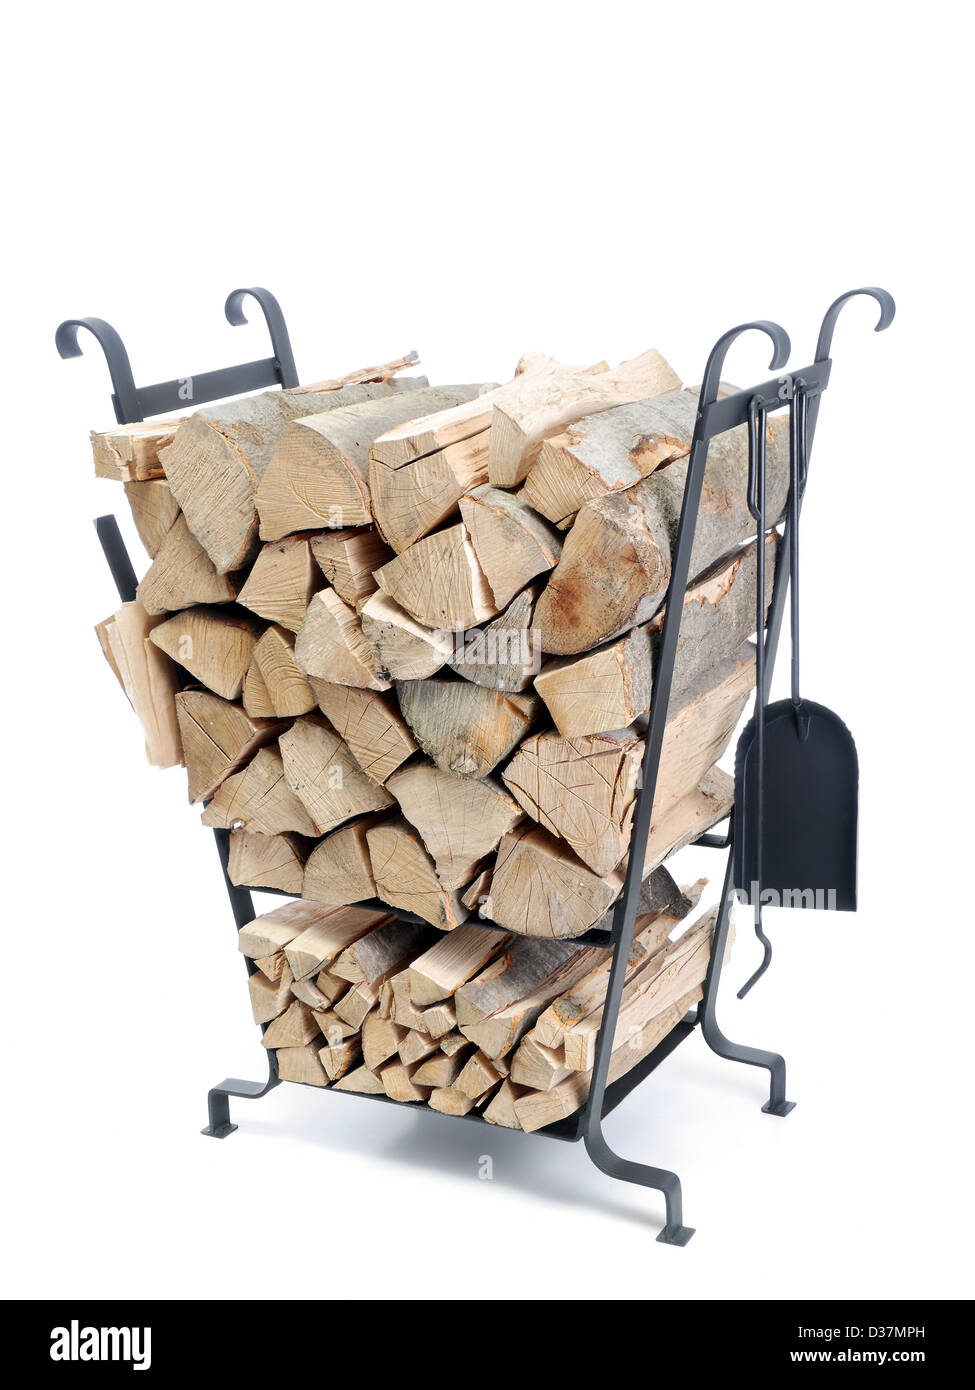 Black firewood metal stand loaded with chopped beechwood logs shot on white background Stock Photo